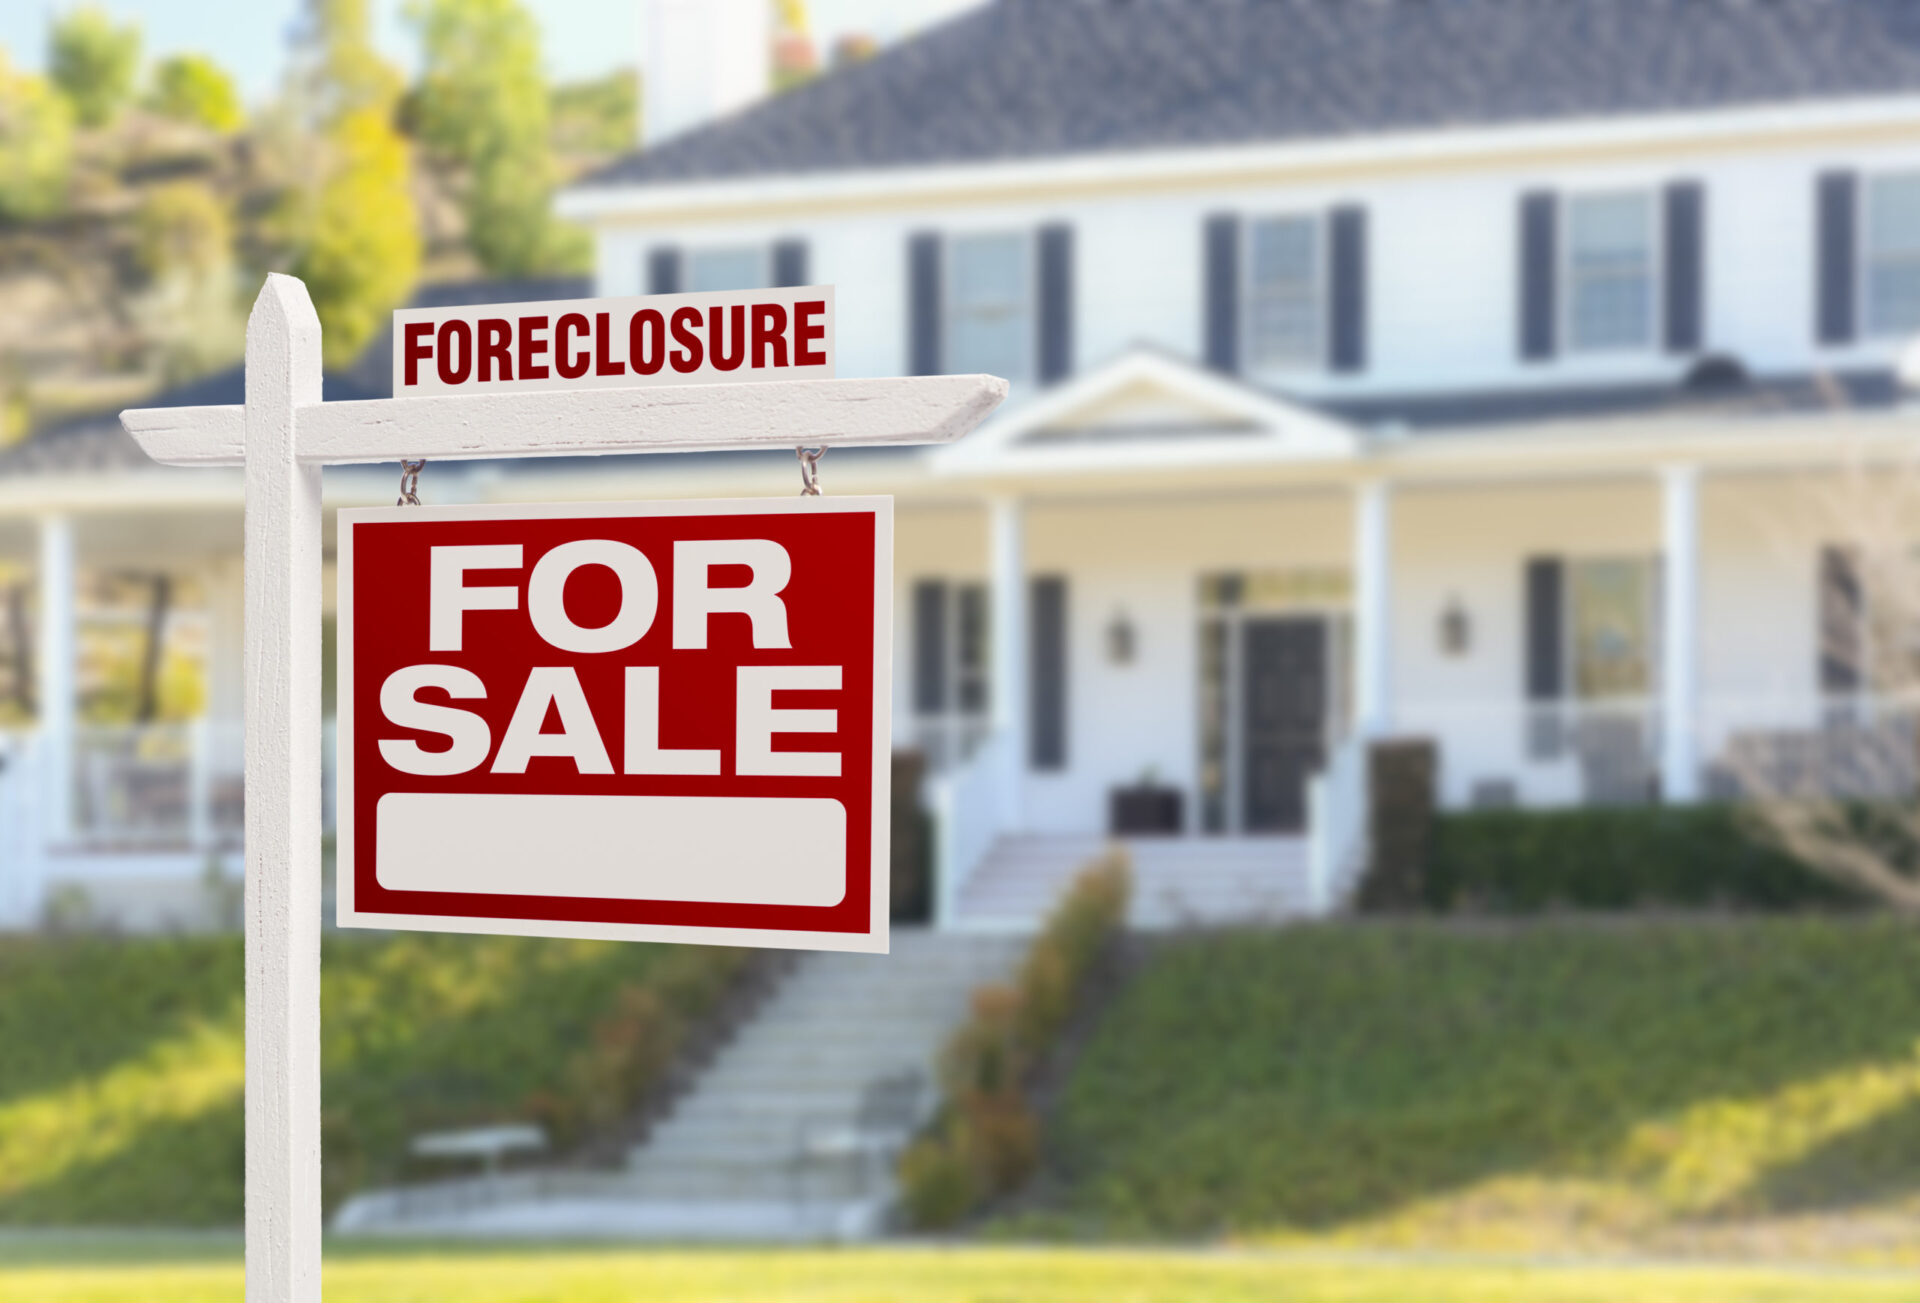 Foreclosures In New Jersey: $10 Million Set Aside To Help